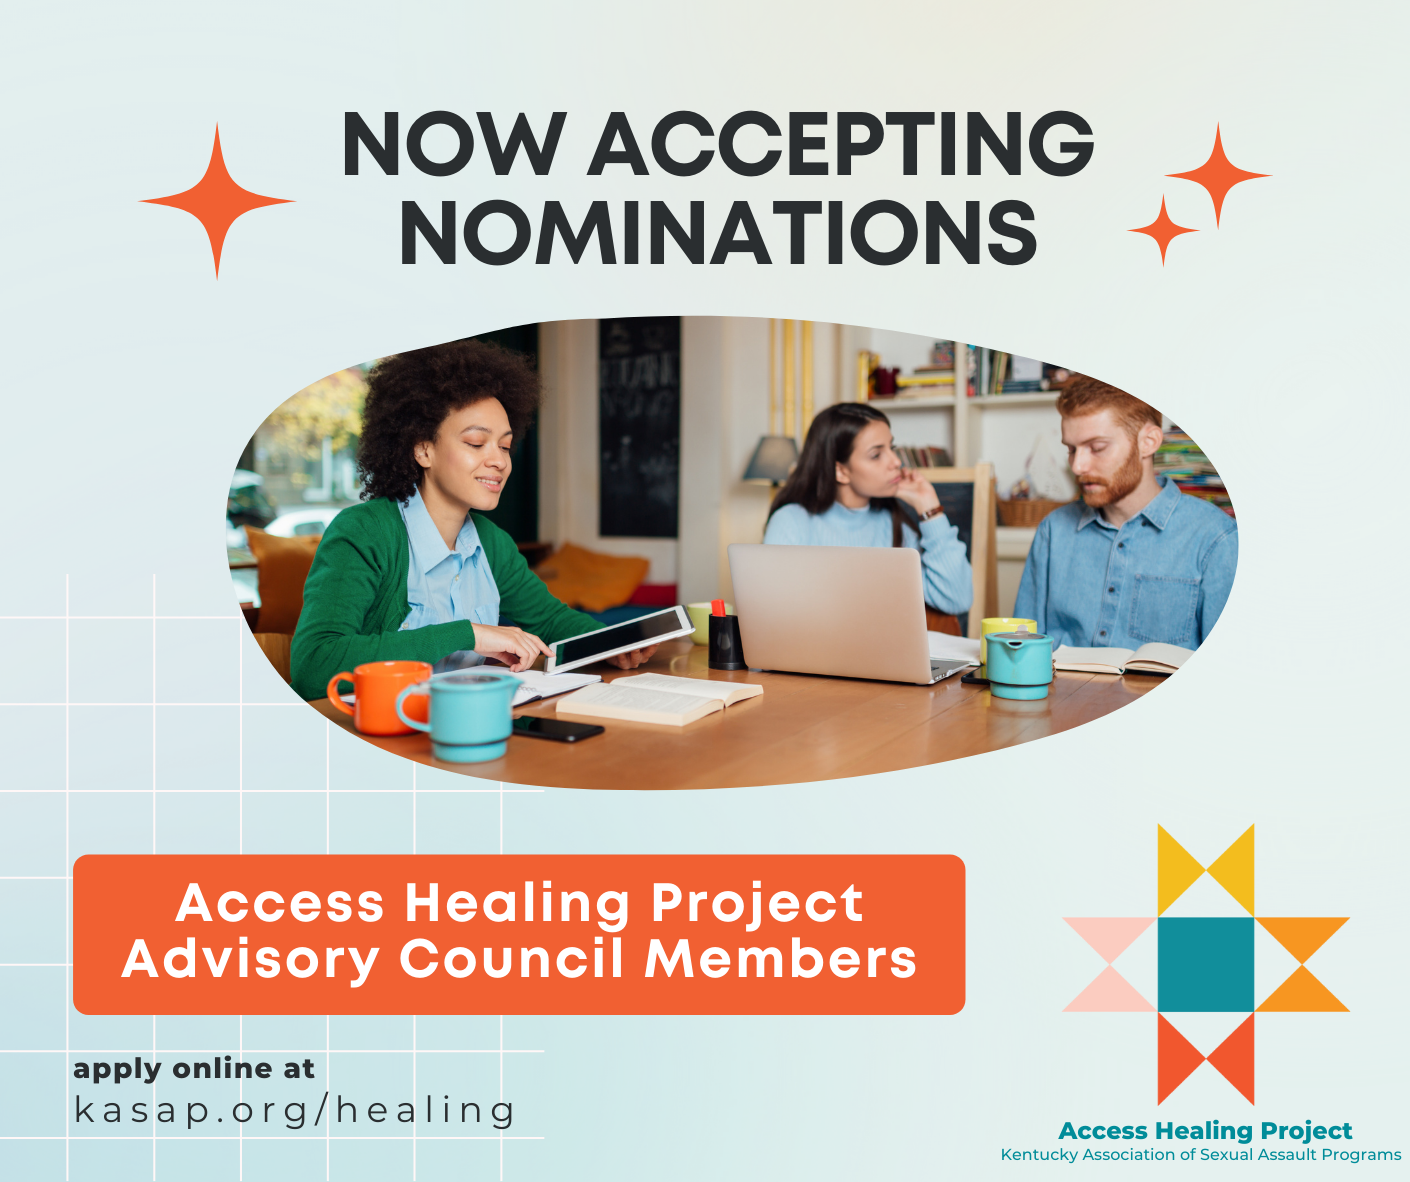 KASAP receives grant, launches Access Healing Project